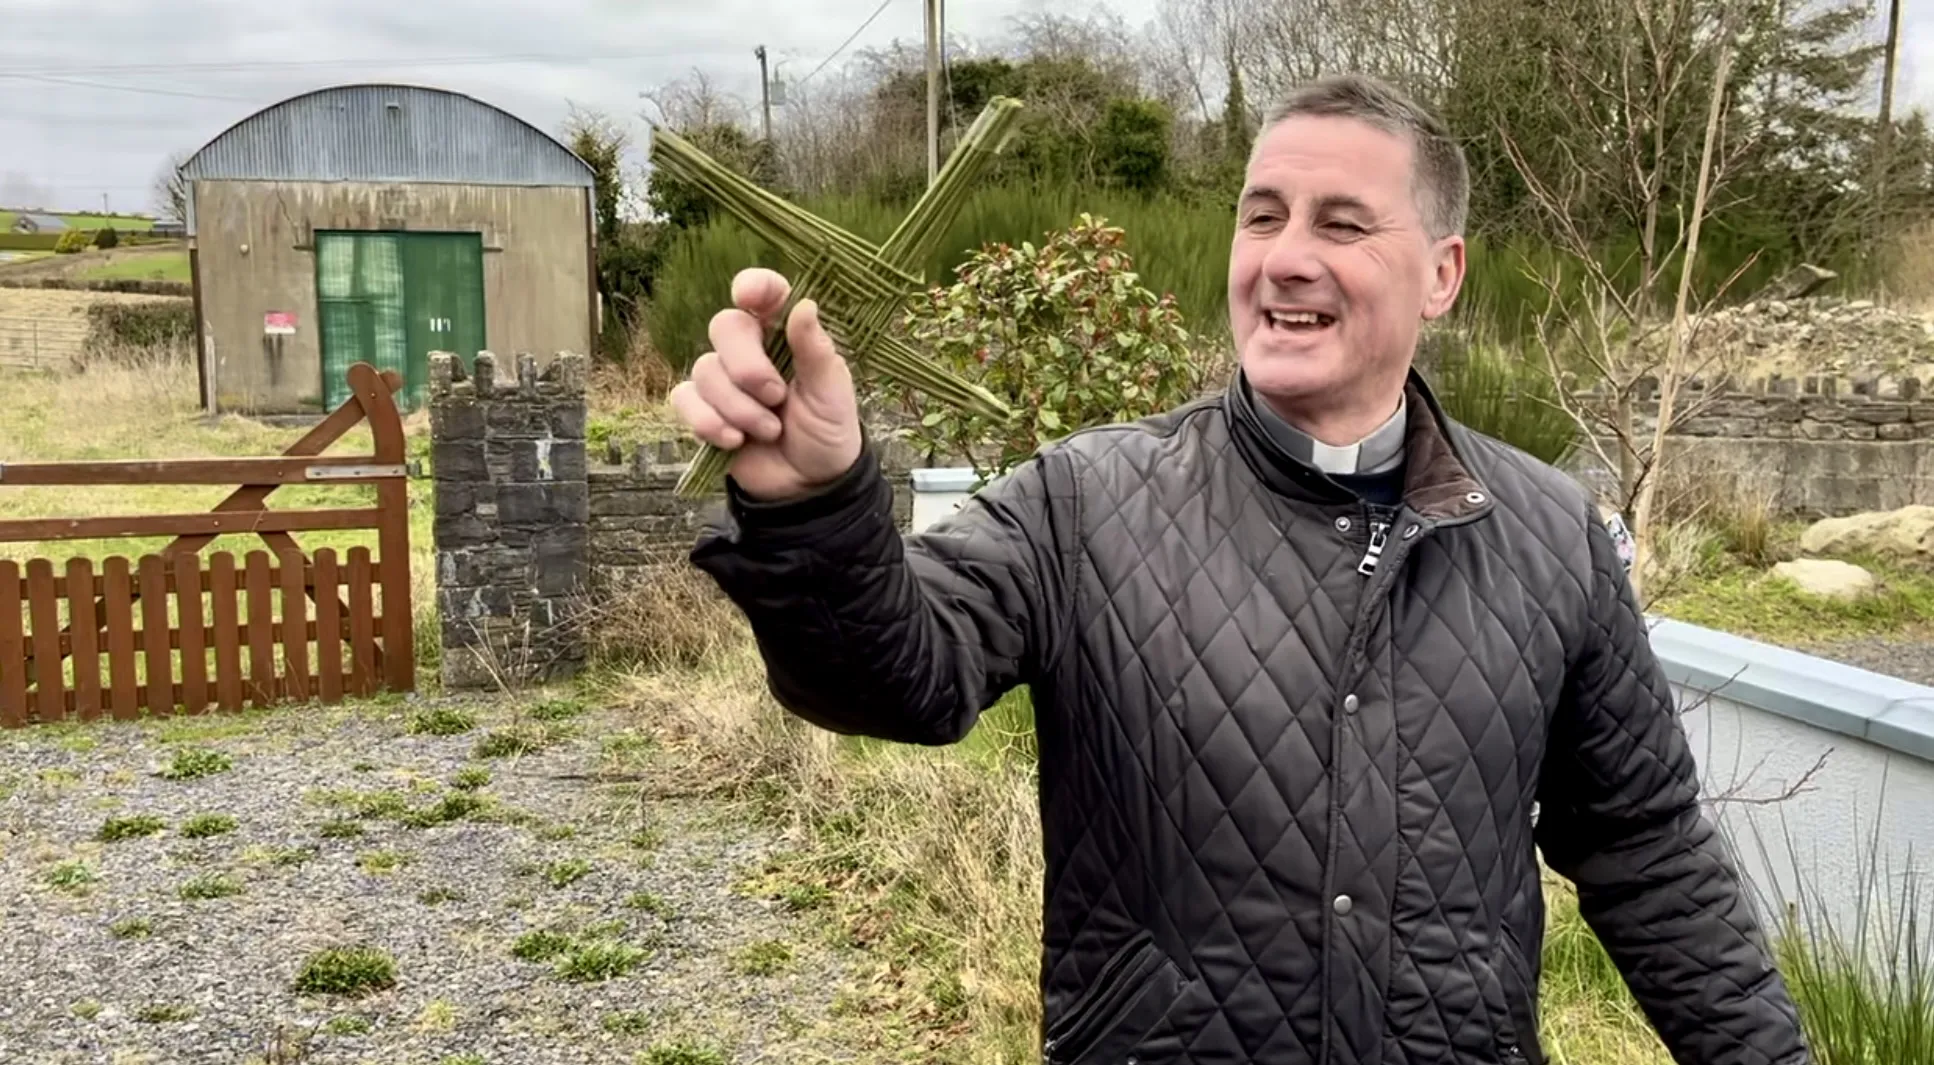 Father Patrick Hughes shows how to make a traditional St. Brigid's Cross in County Cavan, Ireland.?w=200&h=150